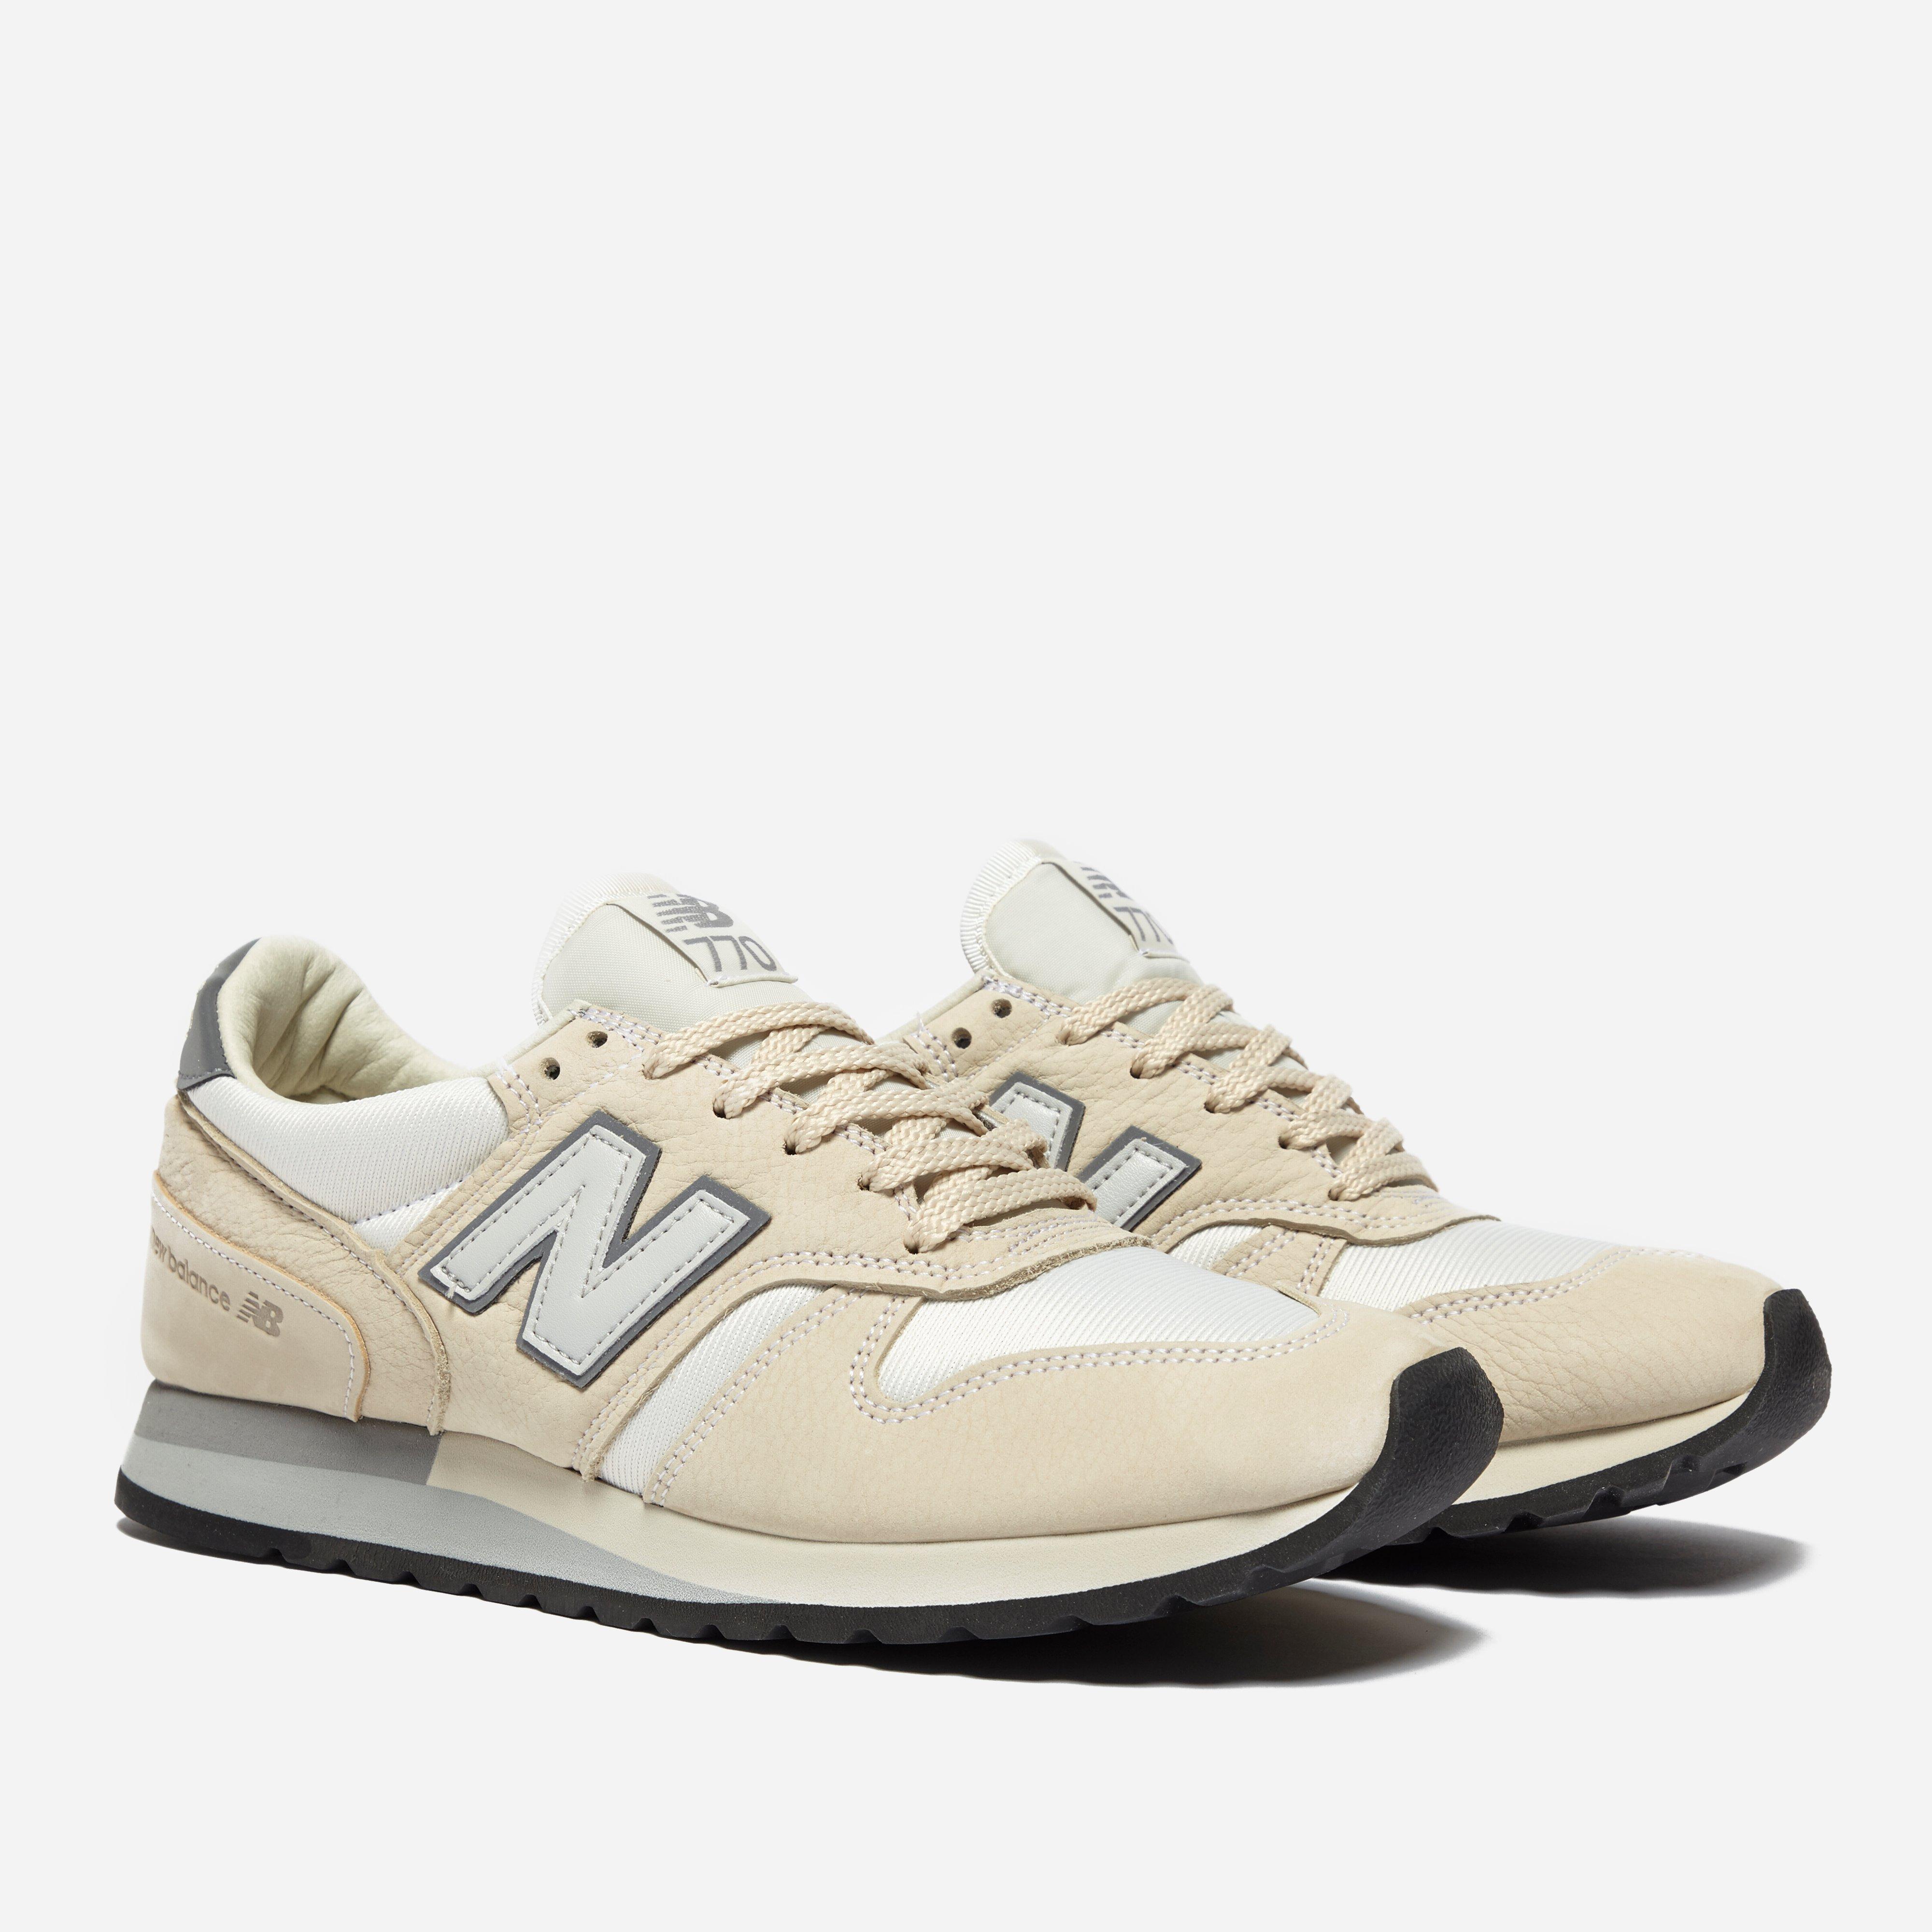 New Balance Rubber X Norse Projects M 770 Nc in Beige (Natural) for Men - Lyst